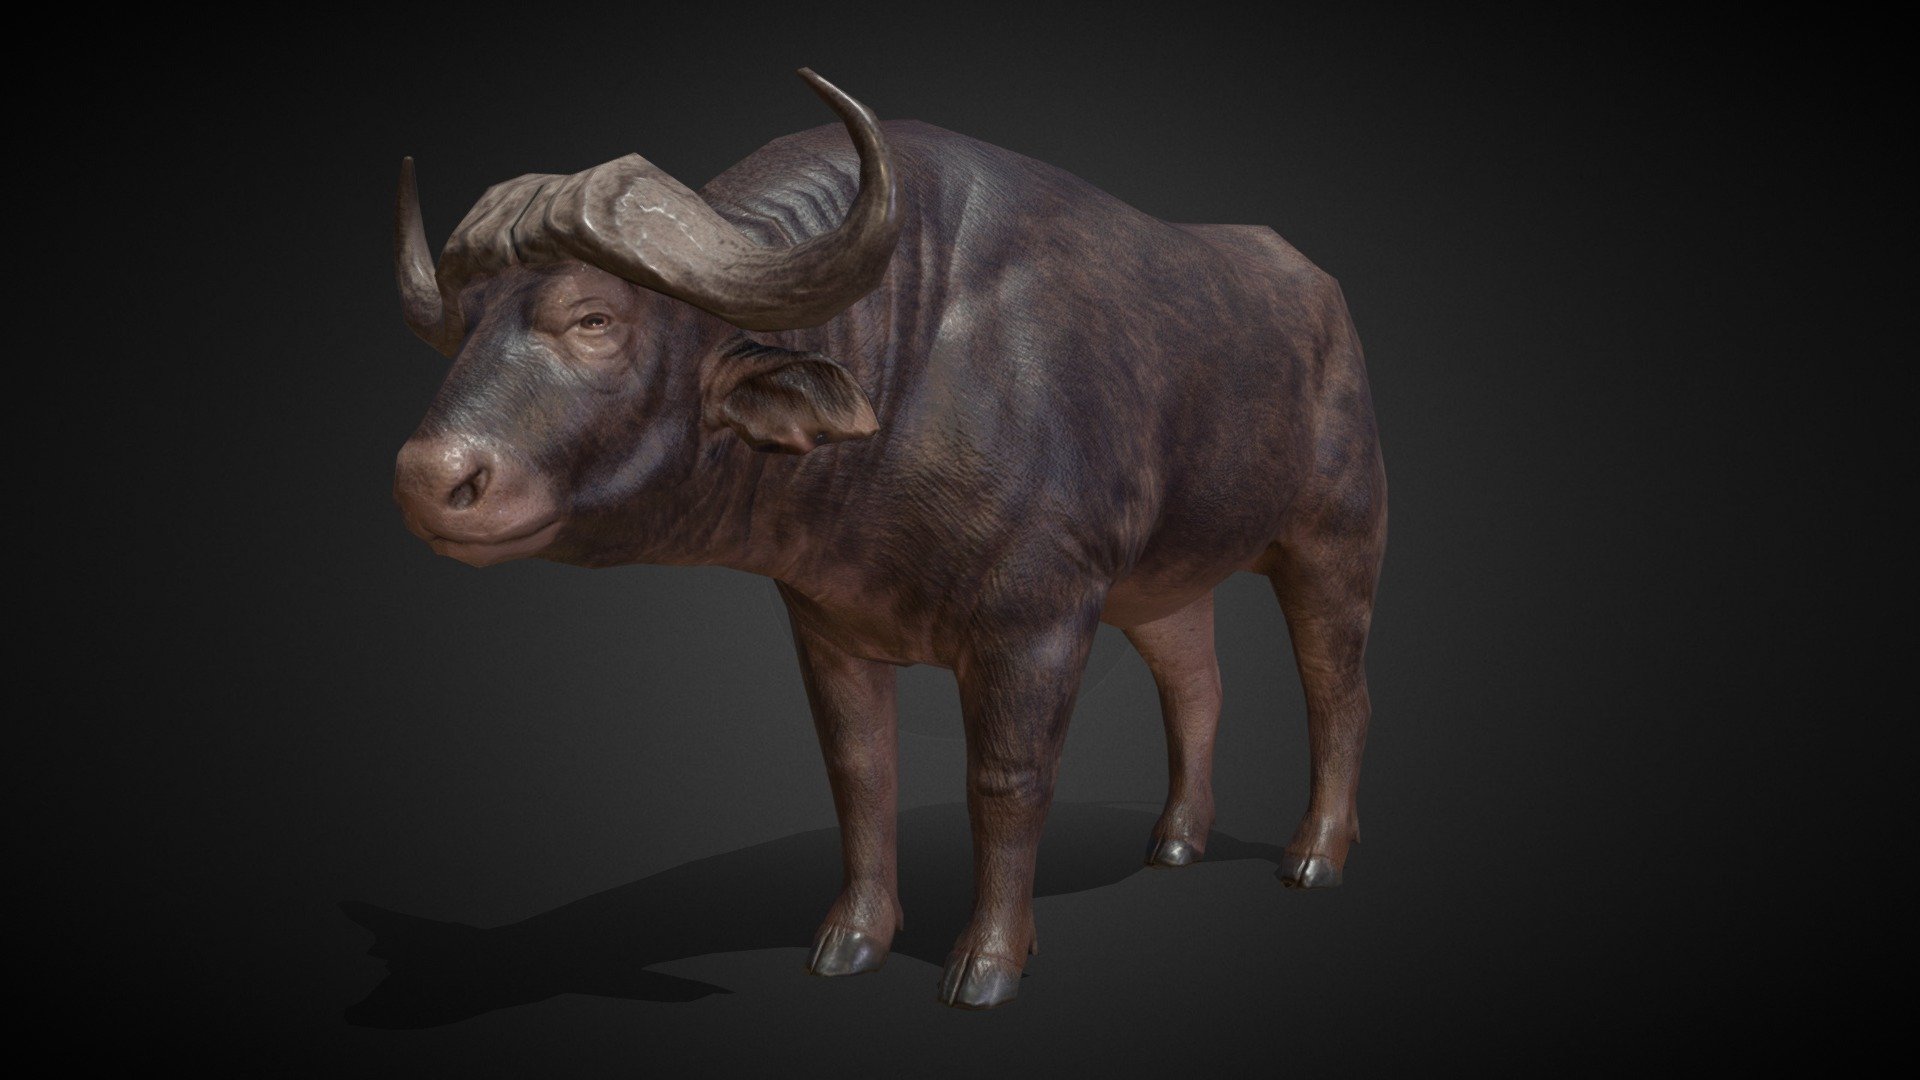 Syncerus Caffer model was made for the mobile game Wild Hunt for Ten Square Games. Sculpture made in Zbrush, retopology and uv-mapping in Blender, textures in Substance Painter 3d model